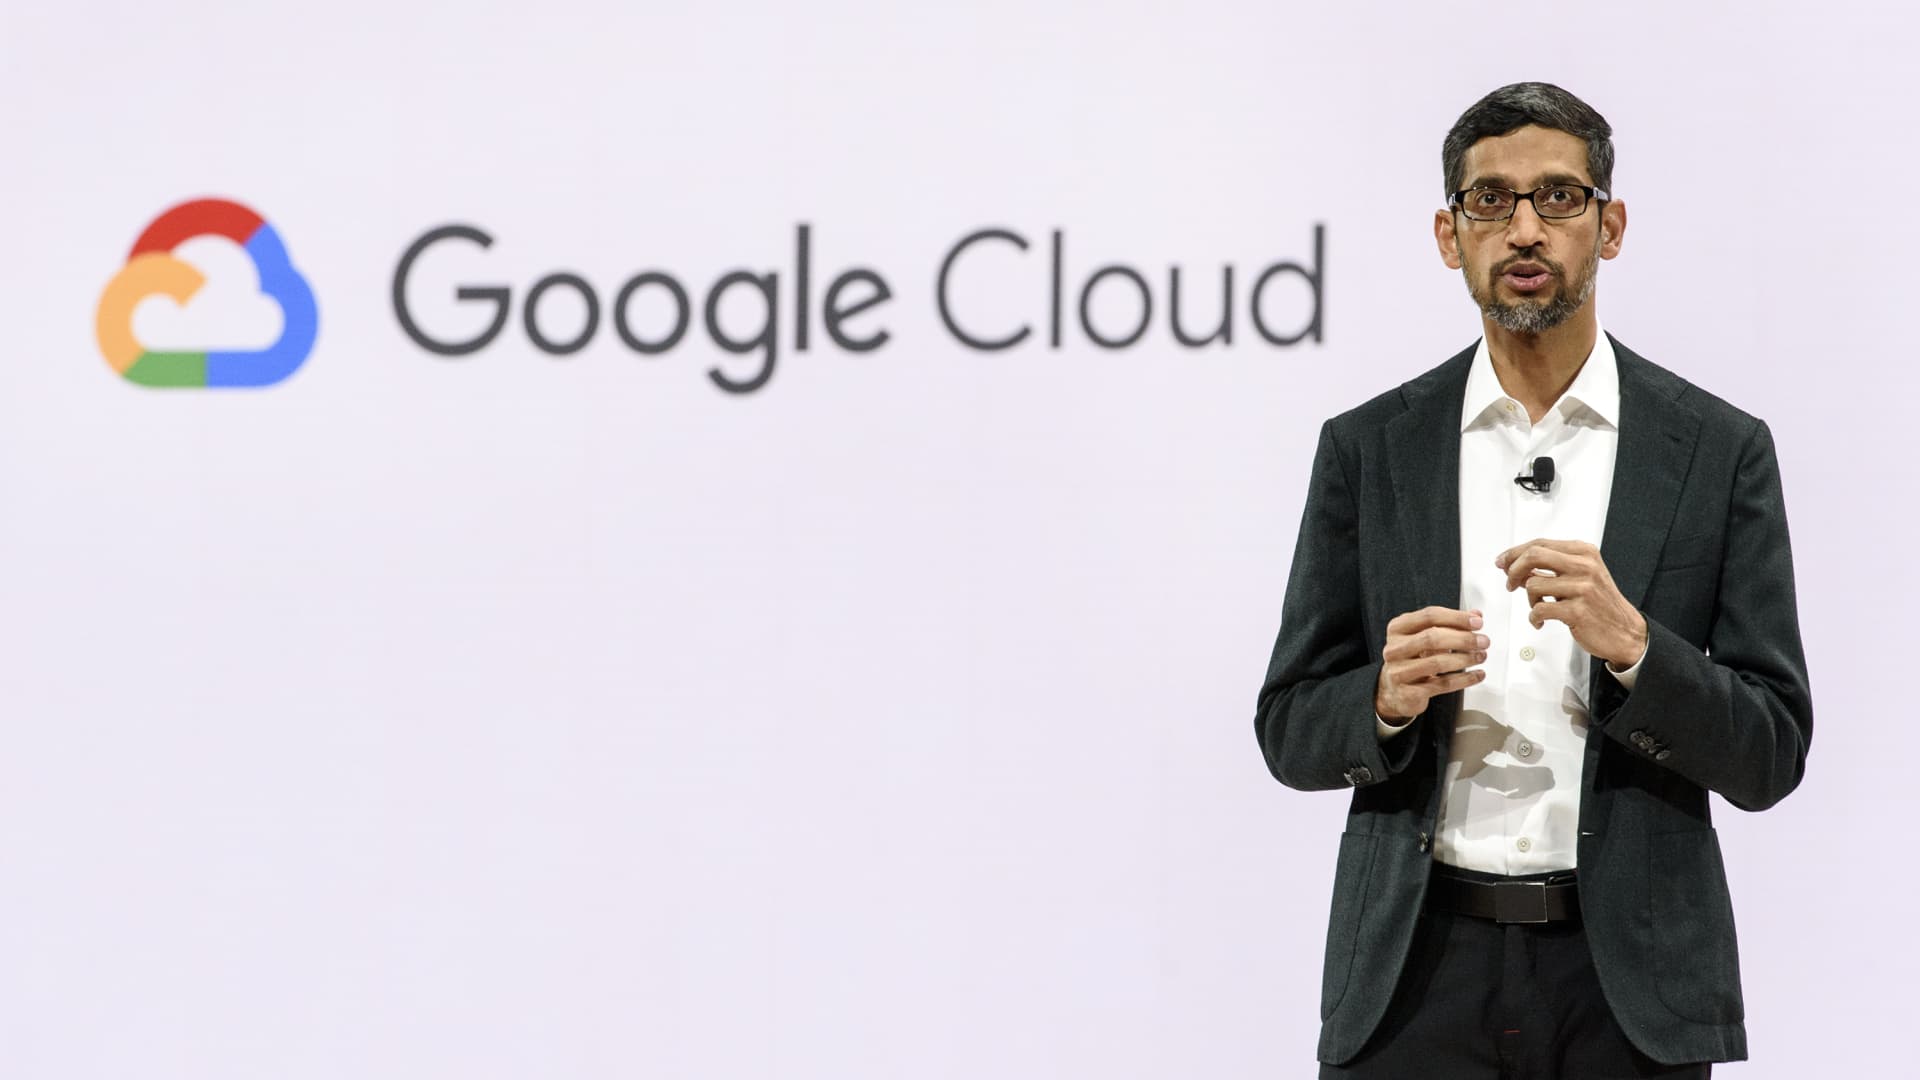 Sundar Pichai, chief executive officer at Google LLC, speaks during the Google Cloud Next '19 event in San Francisco, California, U.S., on Tuesday, April 9, 2019. The conference brings together industry experts to discuss the future of cloud computing.